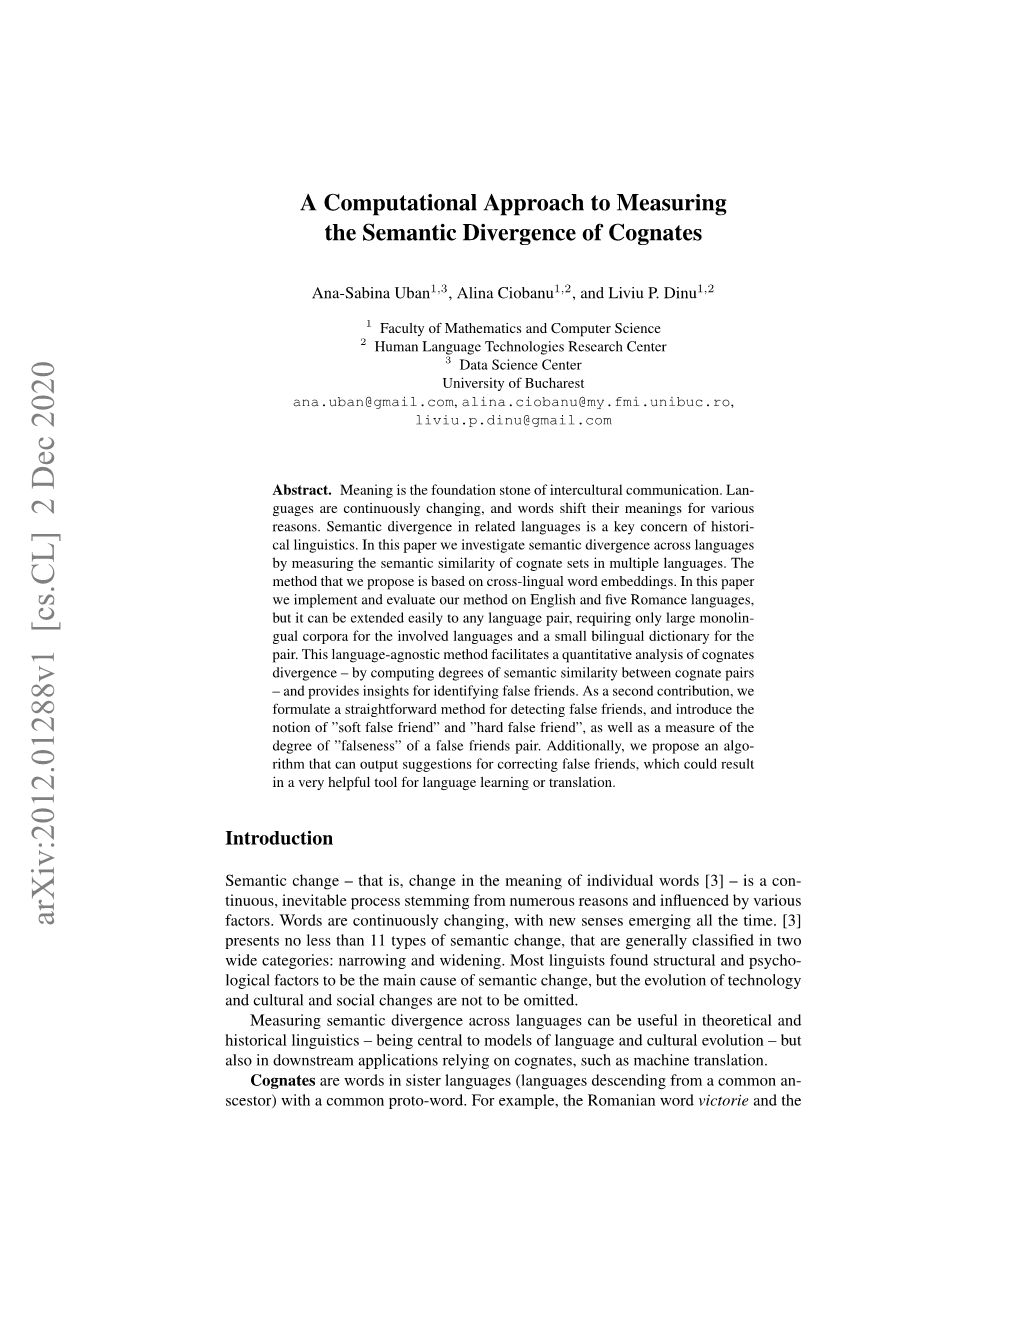 A Computational Approach to Measuring the Semantic Divergence of Cognates